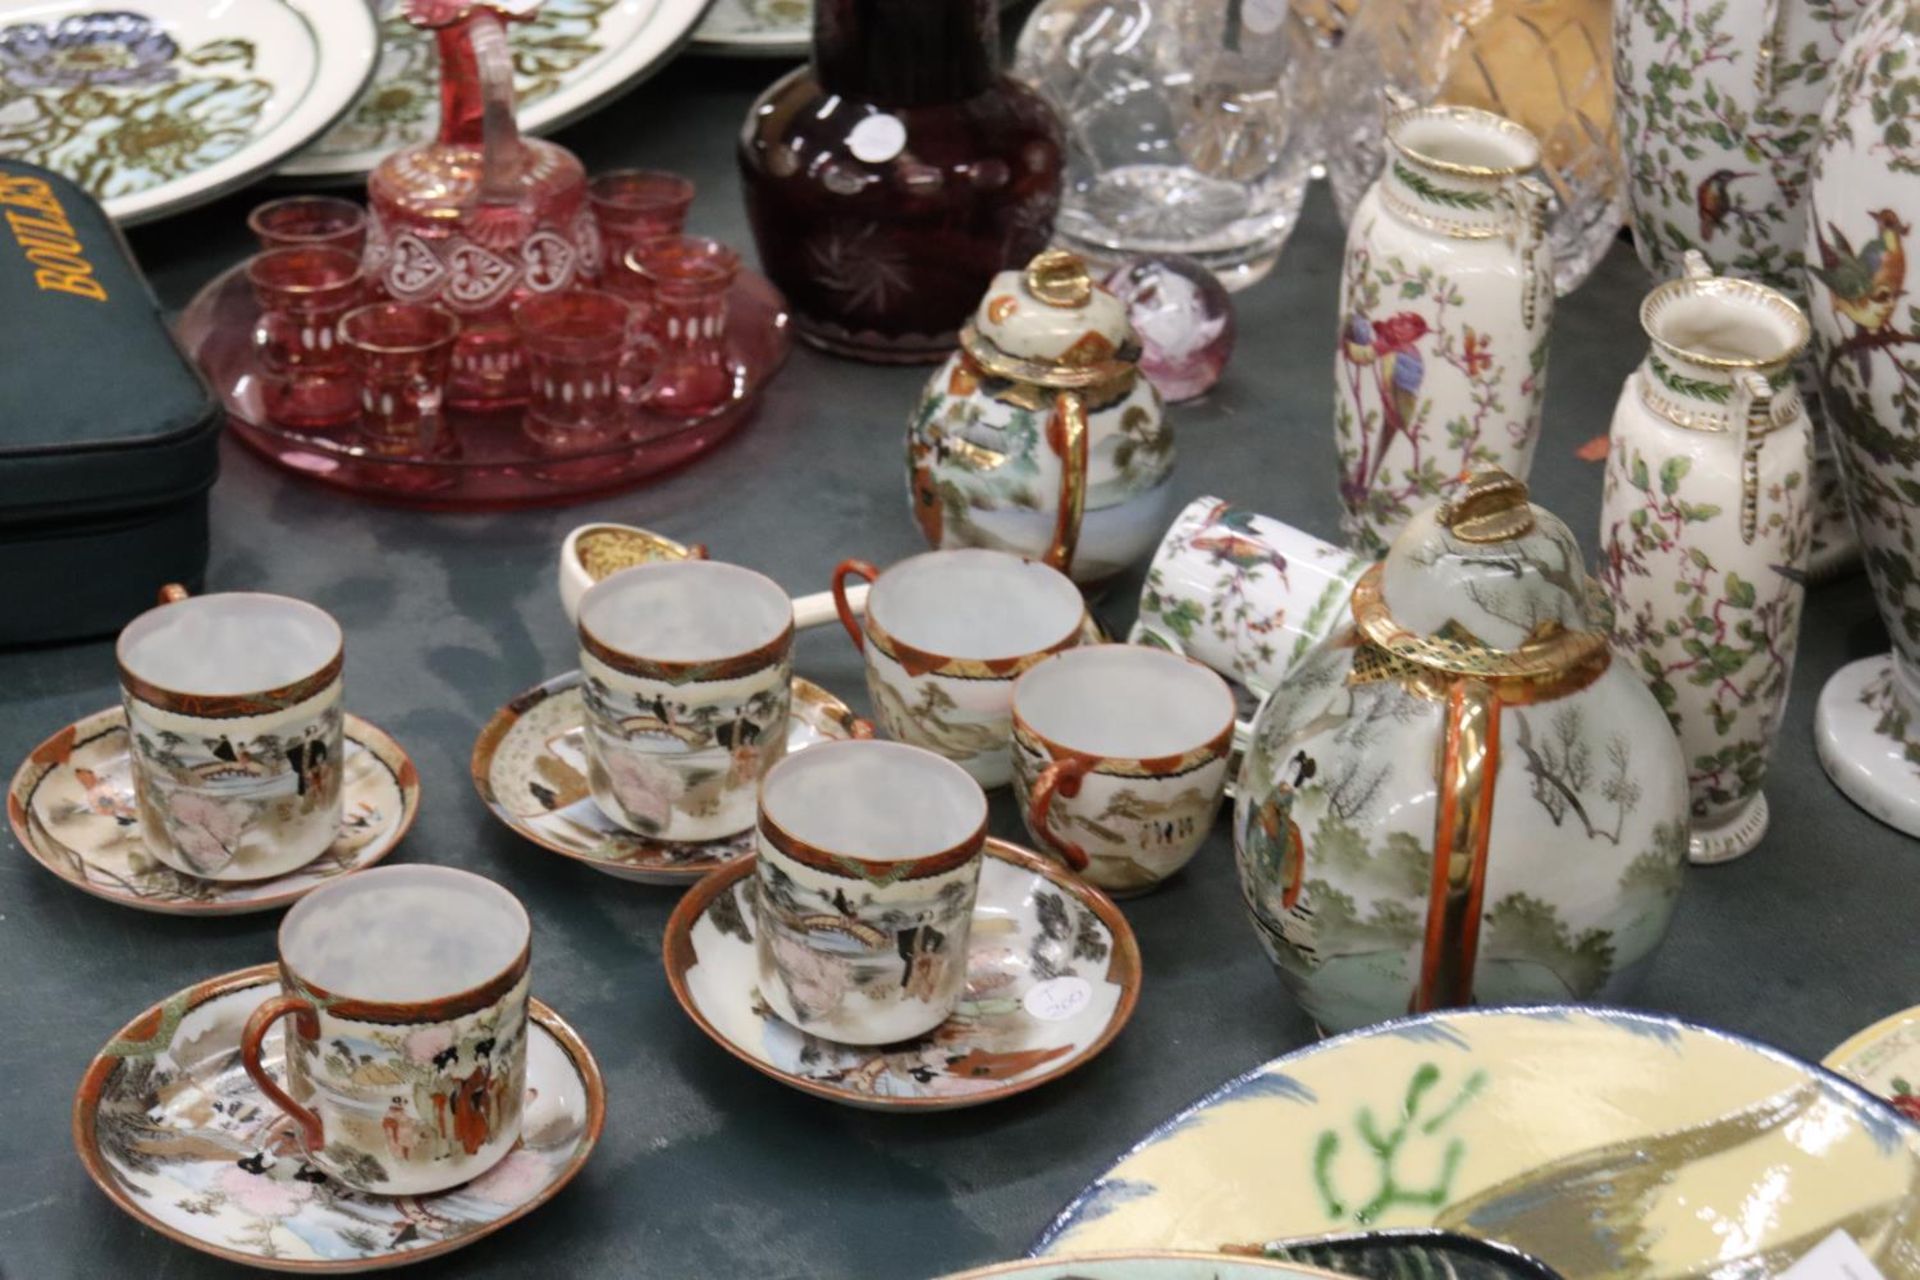 AN ORIENTAL TEASET TO INCLUDE TEAPOT, CUPS AND SAUCERS AND TO AUSTRIA VICTORIA LARGE VASES - Image 5 of 5